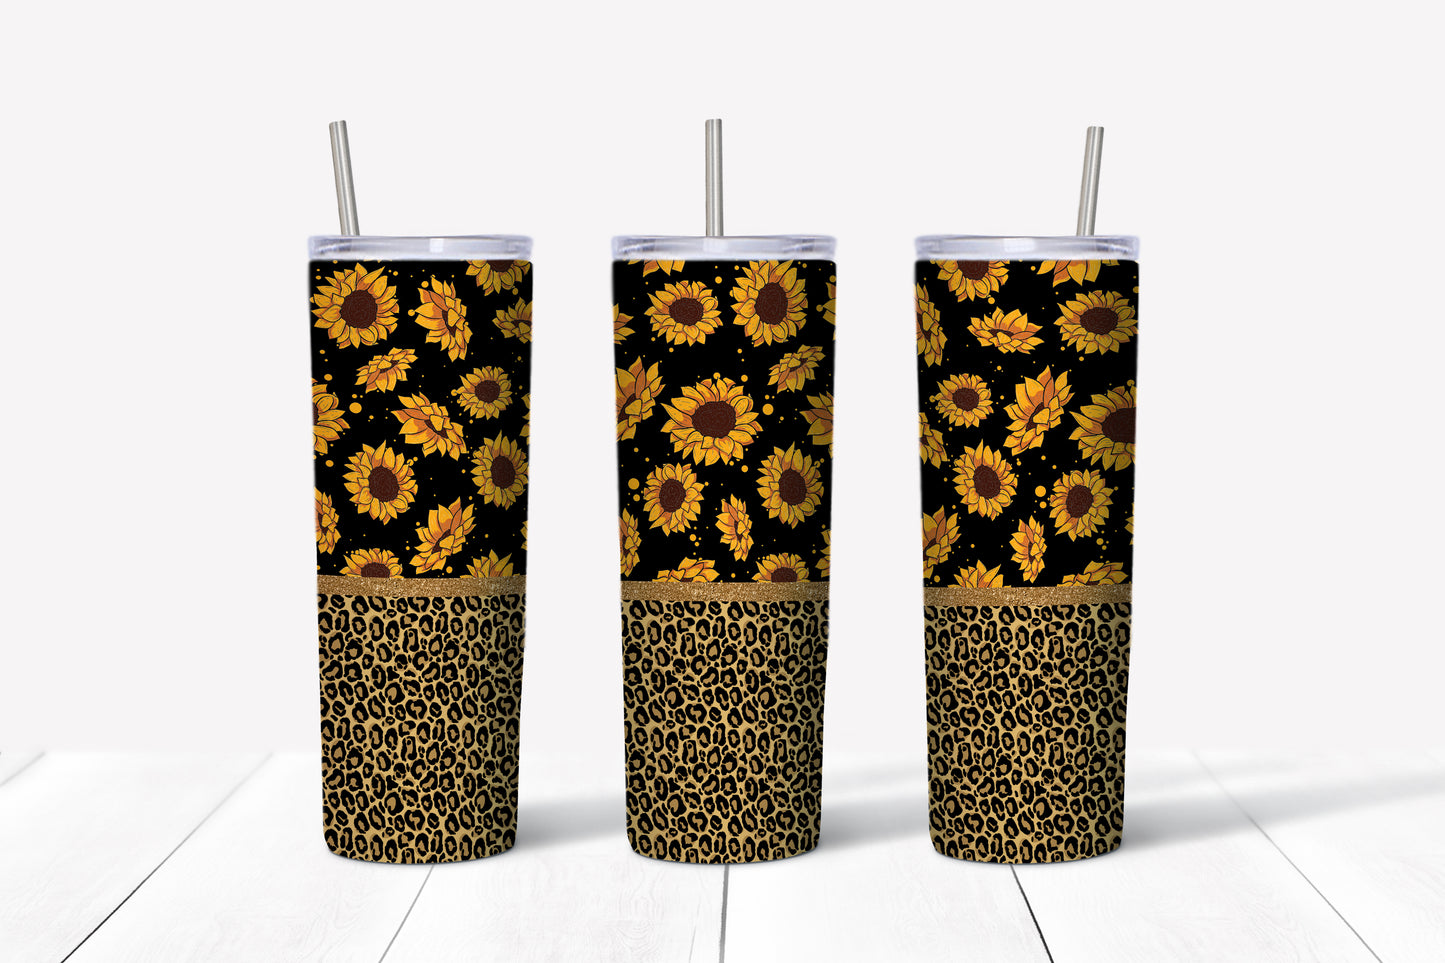 Leopard and Sunflower